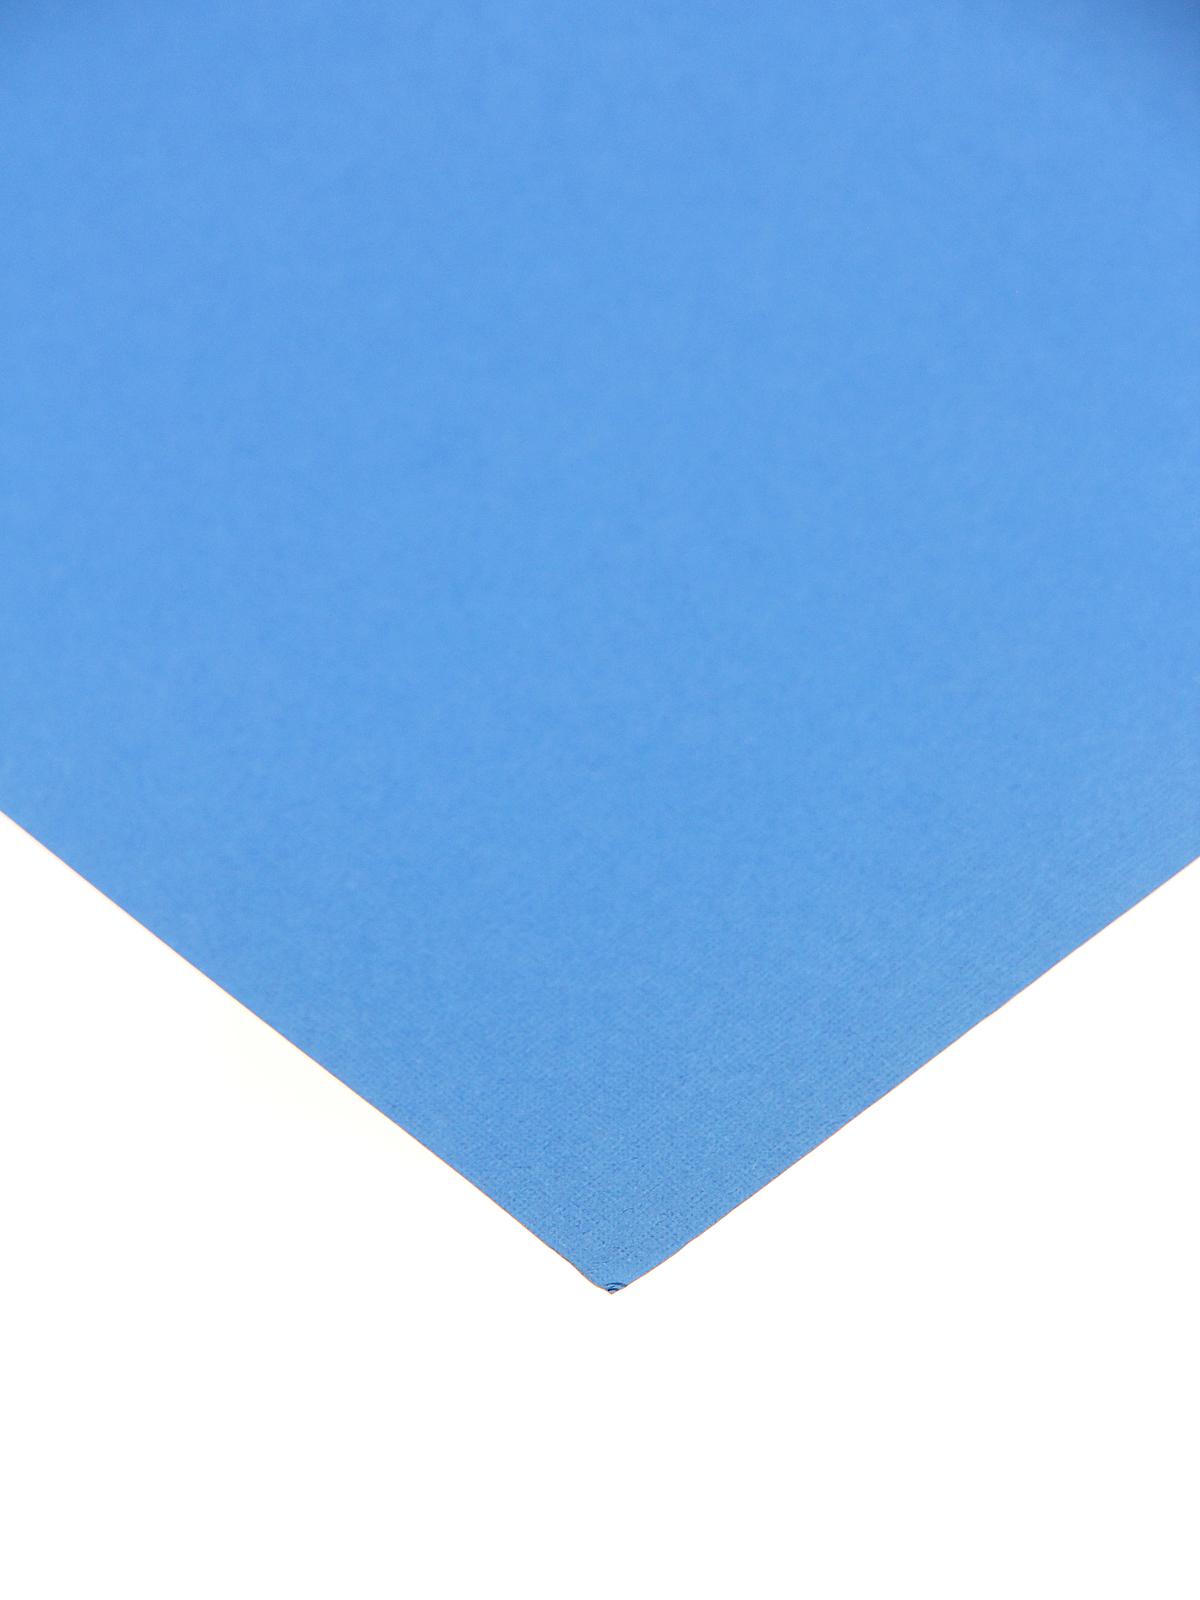 80 Lb. Canvas 12 In. X 12 In. Sheet Mosaic Blue